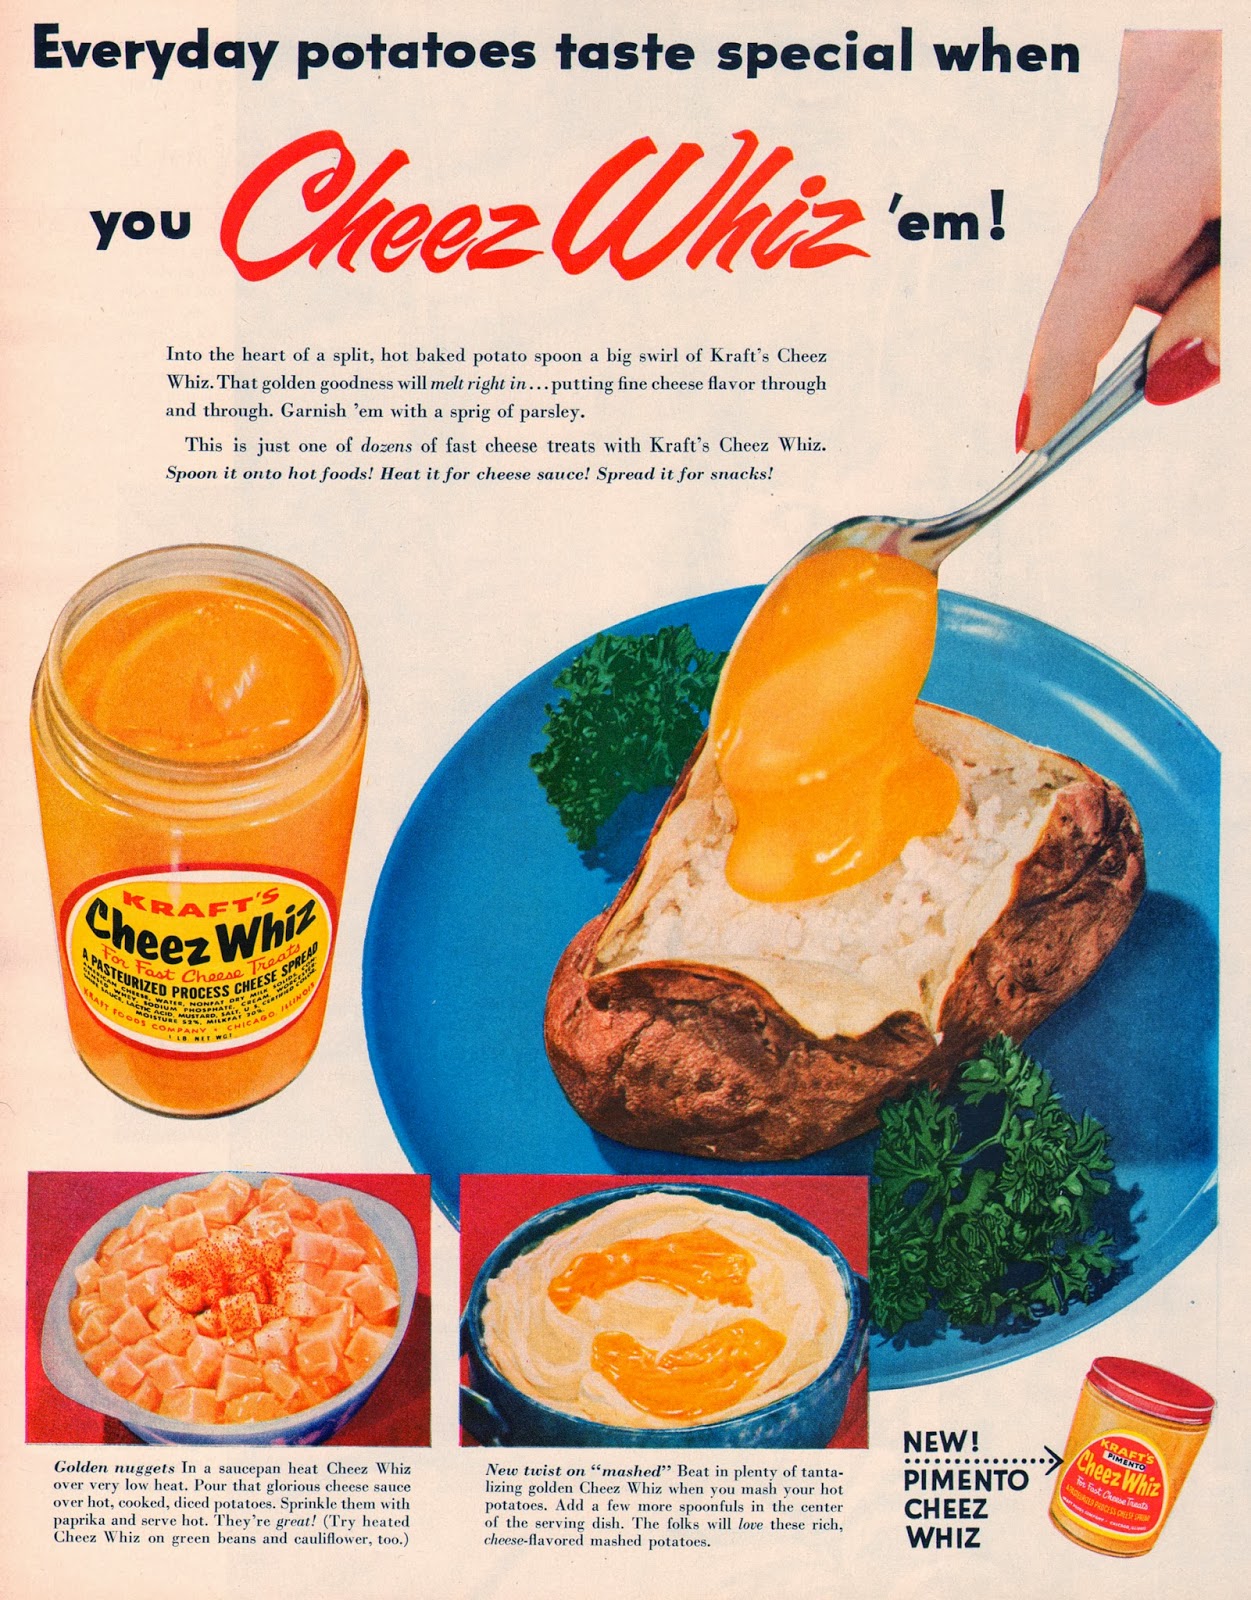 14 Interesting Vintage Food Ads From the 1950s Vintage